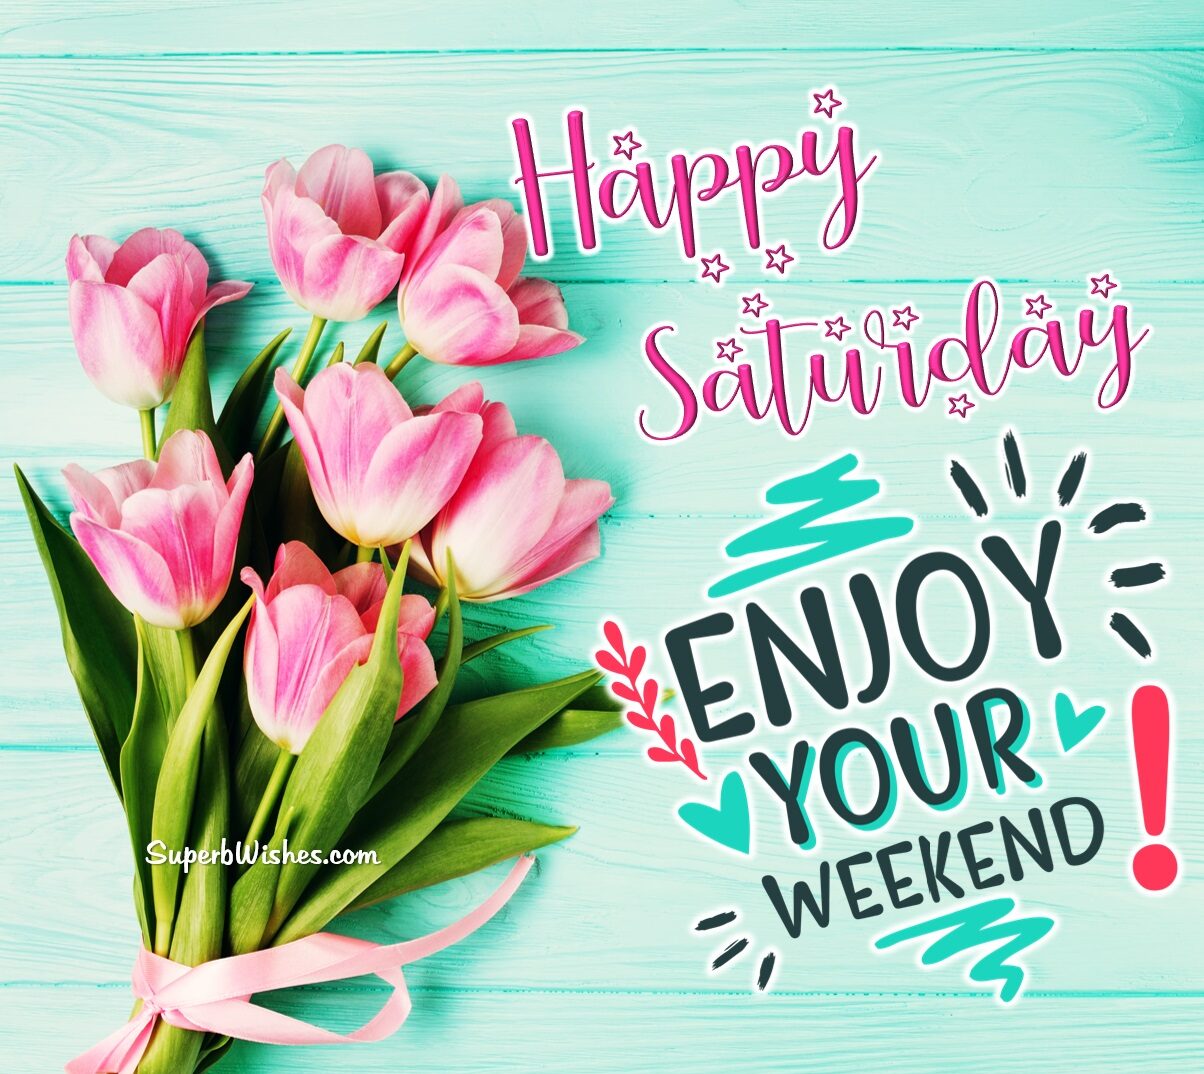 Happy Saturday 2023 Images - Enjoy Your Weekend | SuperbWishes.com